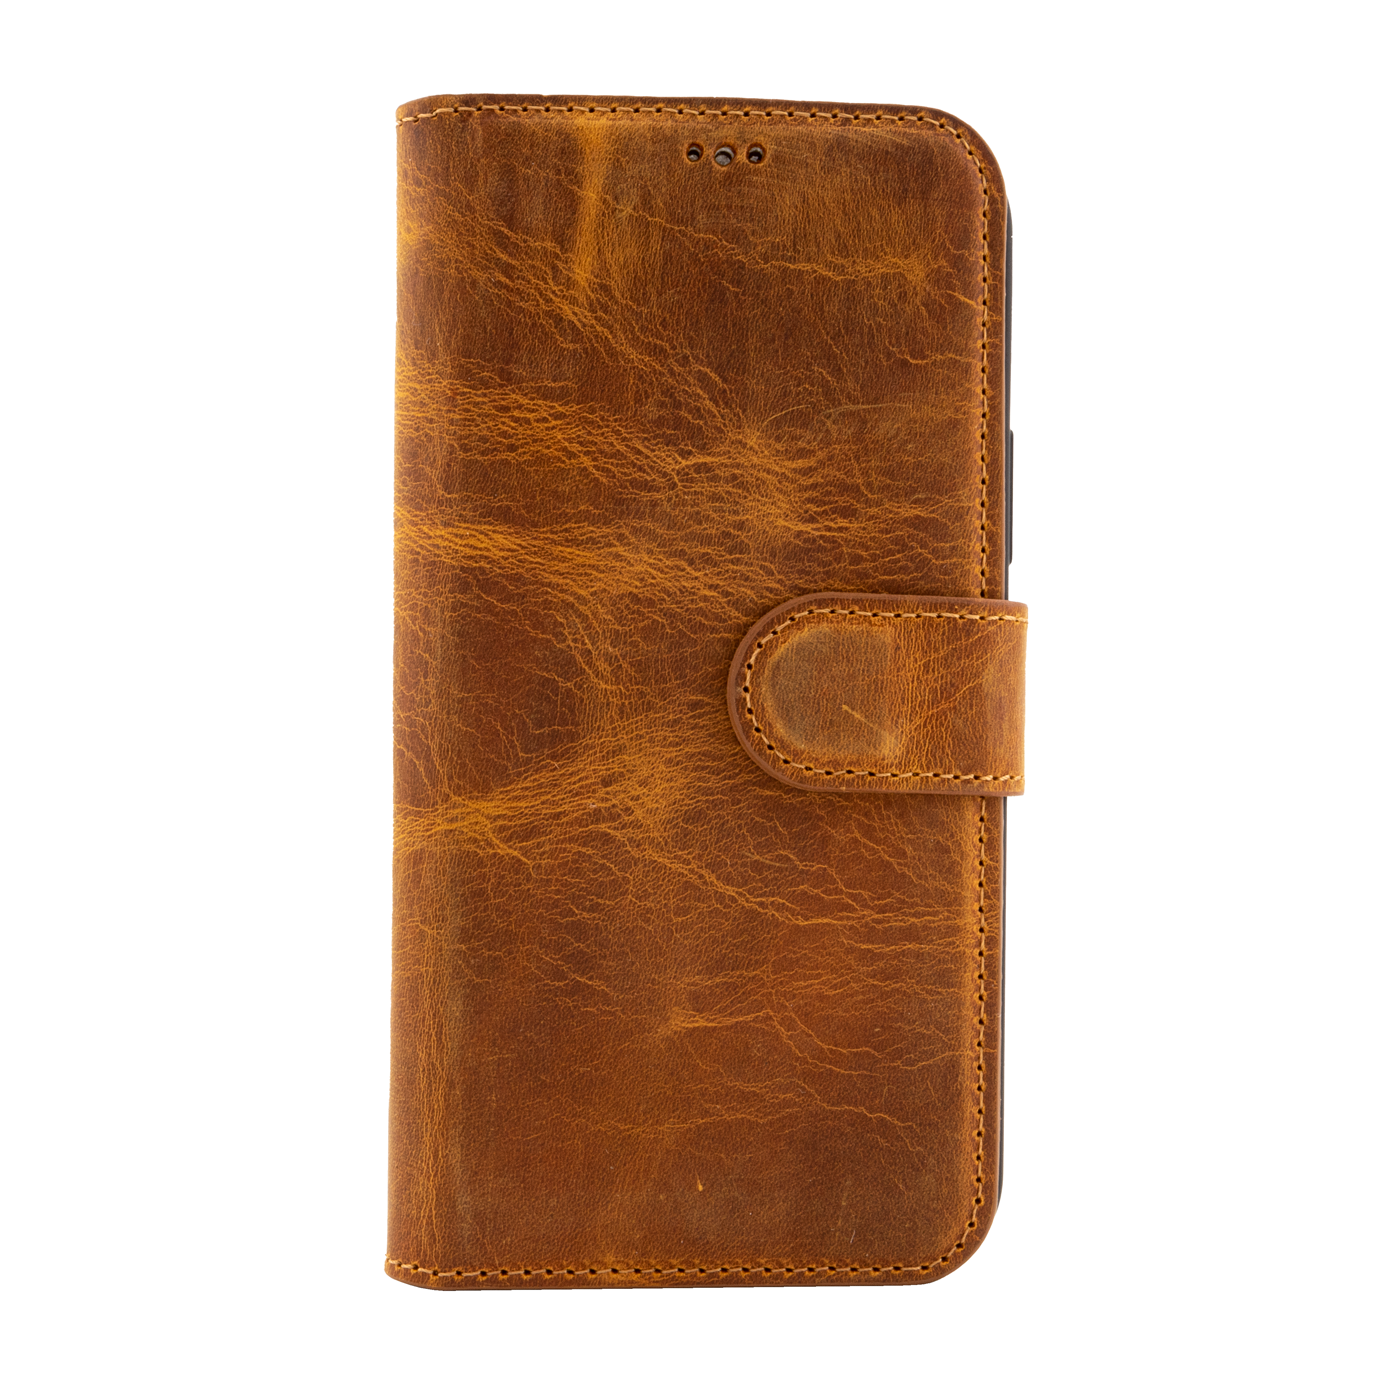 Galen Leather Co. Leather Hardback Wallet Case Iphone 12 Mini (5.4")- Crazy Horse Brown